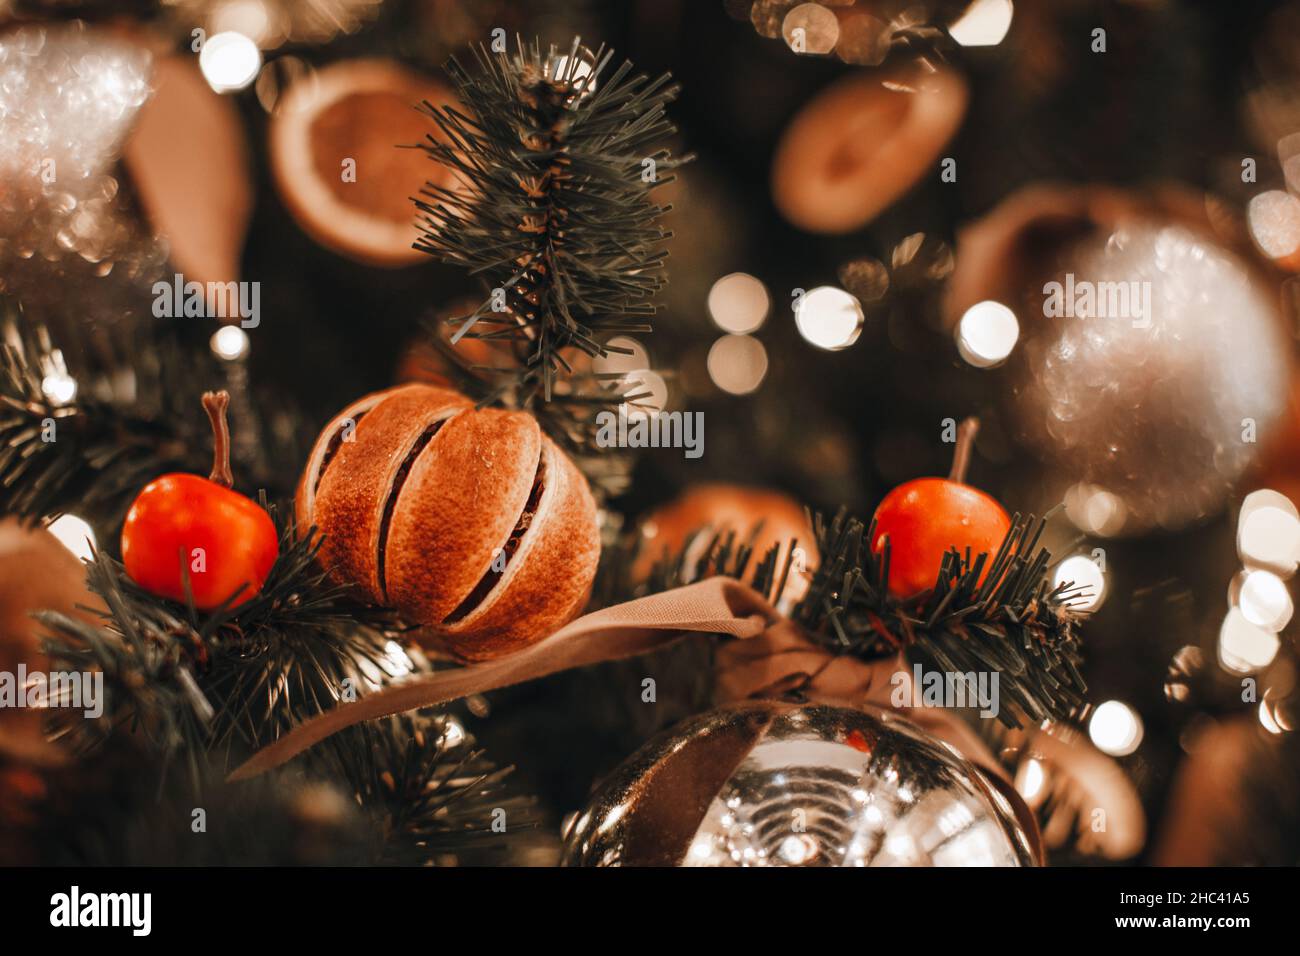 https://c8.alamy.com/comp/2HC41A5/christmas-tree-branches-decorated-with-dried-oranges-mandarins-and-cherry-cozy-details-and-golden-bokeh-garlands-lights-winter-magic-decorations-2HC41A5.jpg